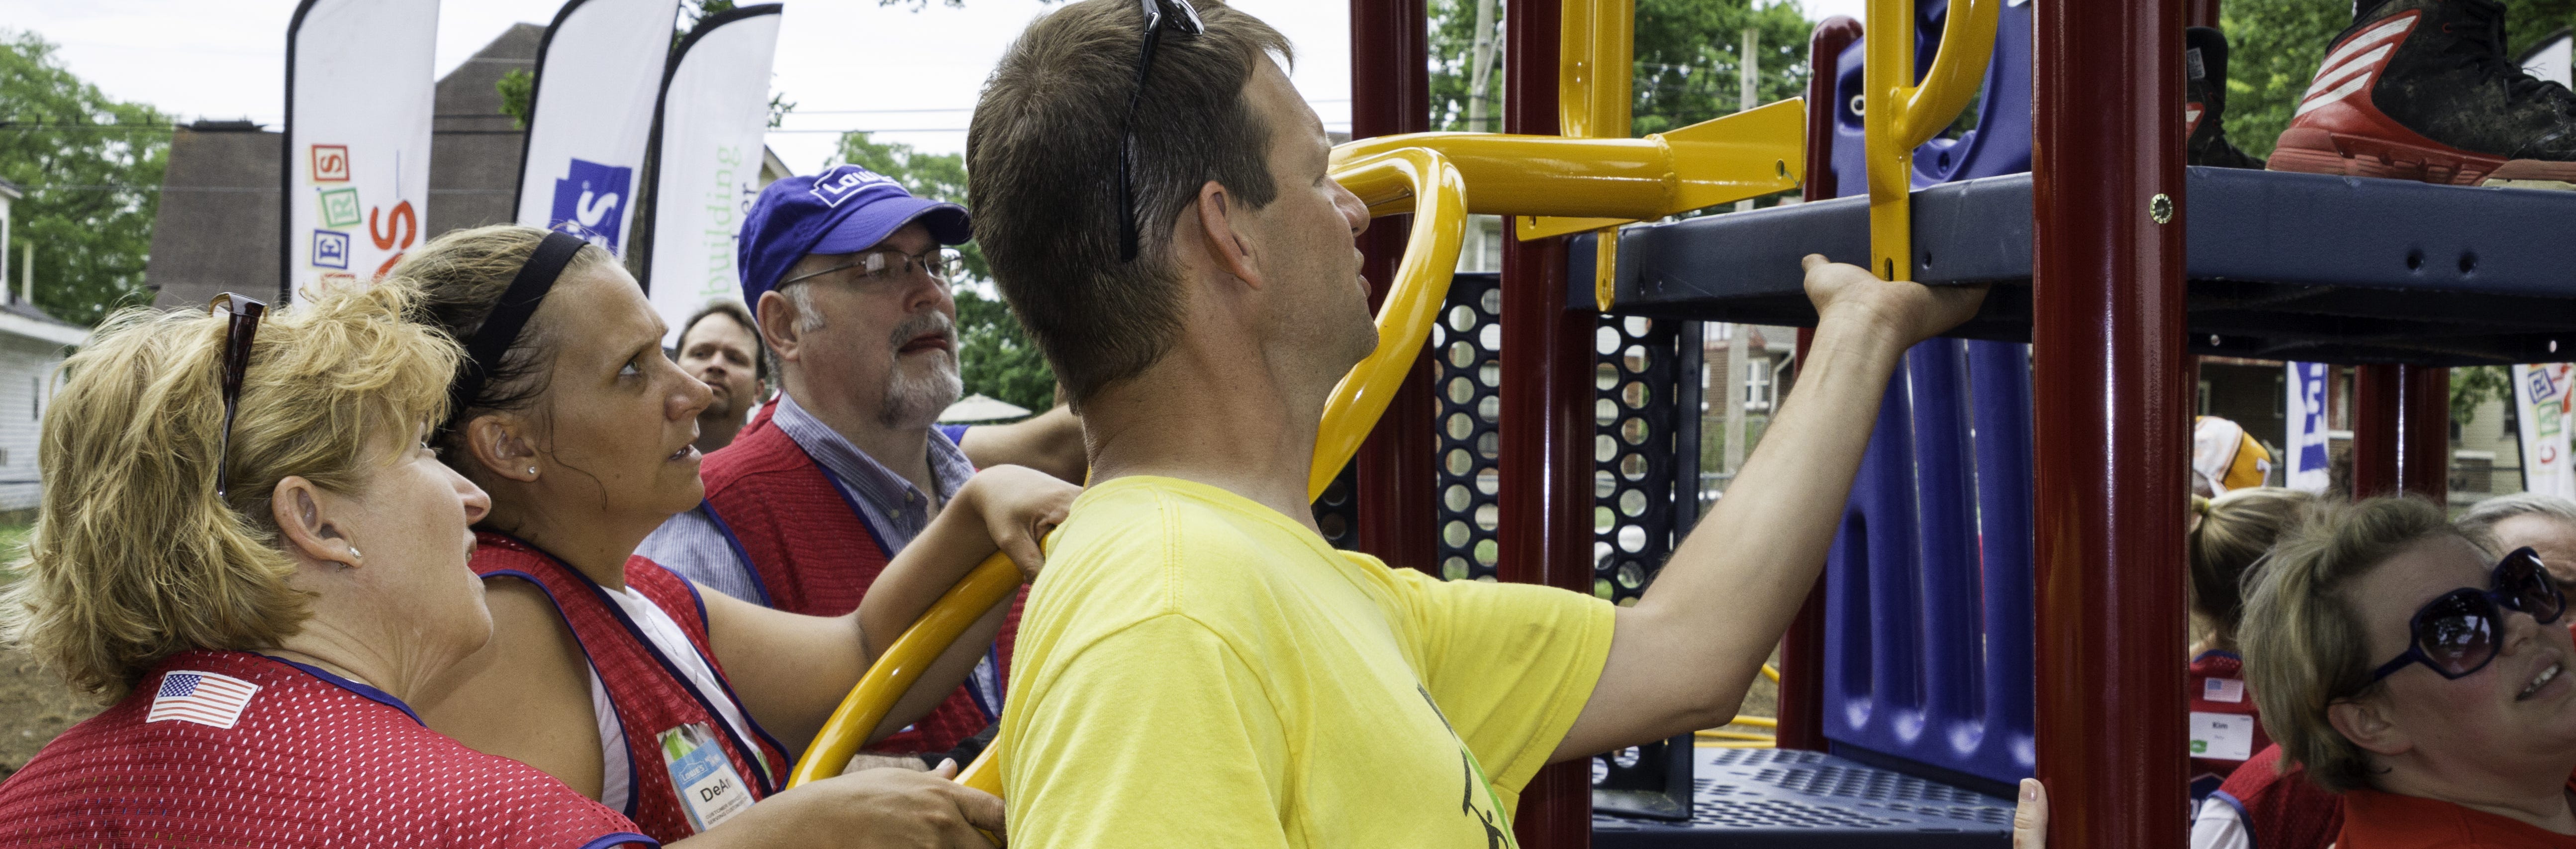 Celebrate National Playground Safety Week With Free Maintenance and Supervision Guides